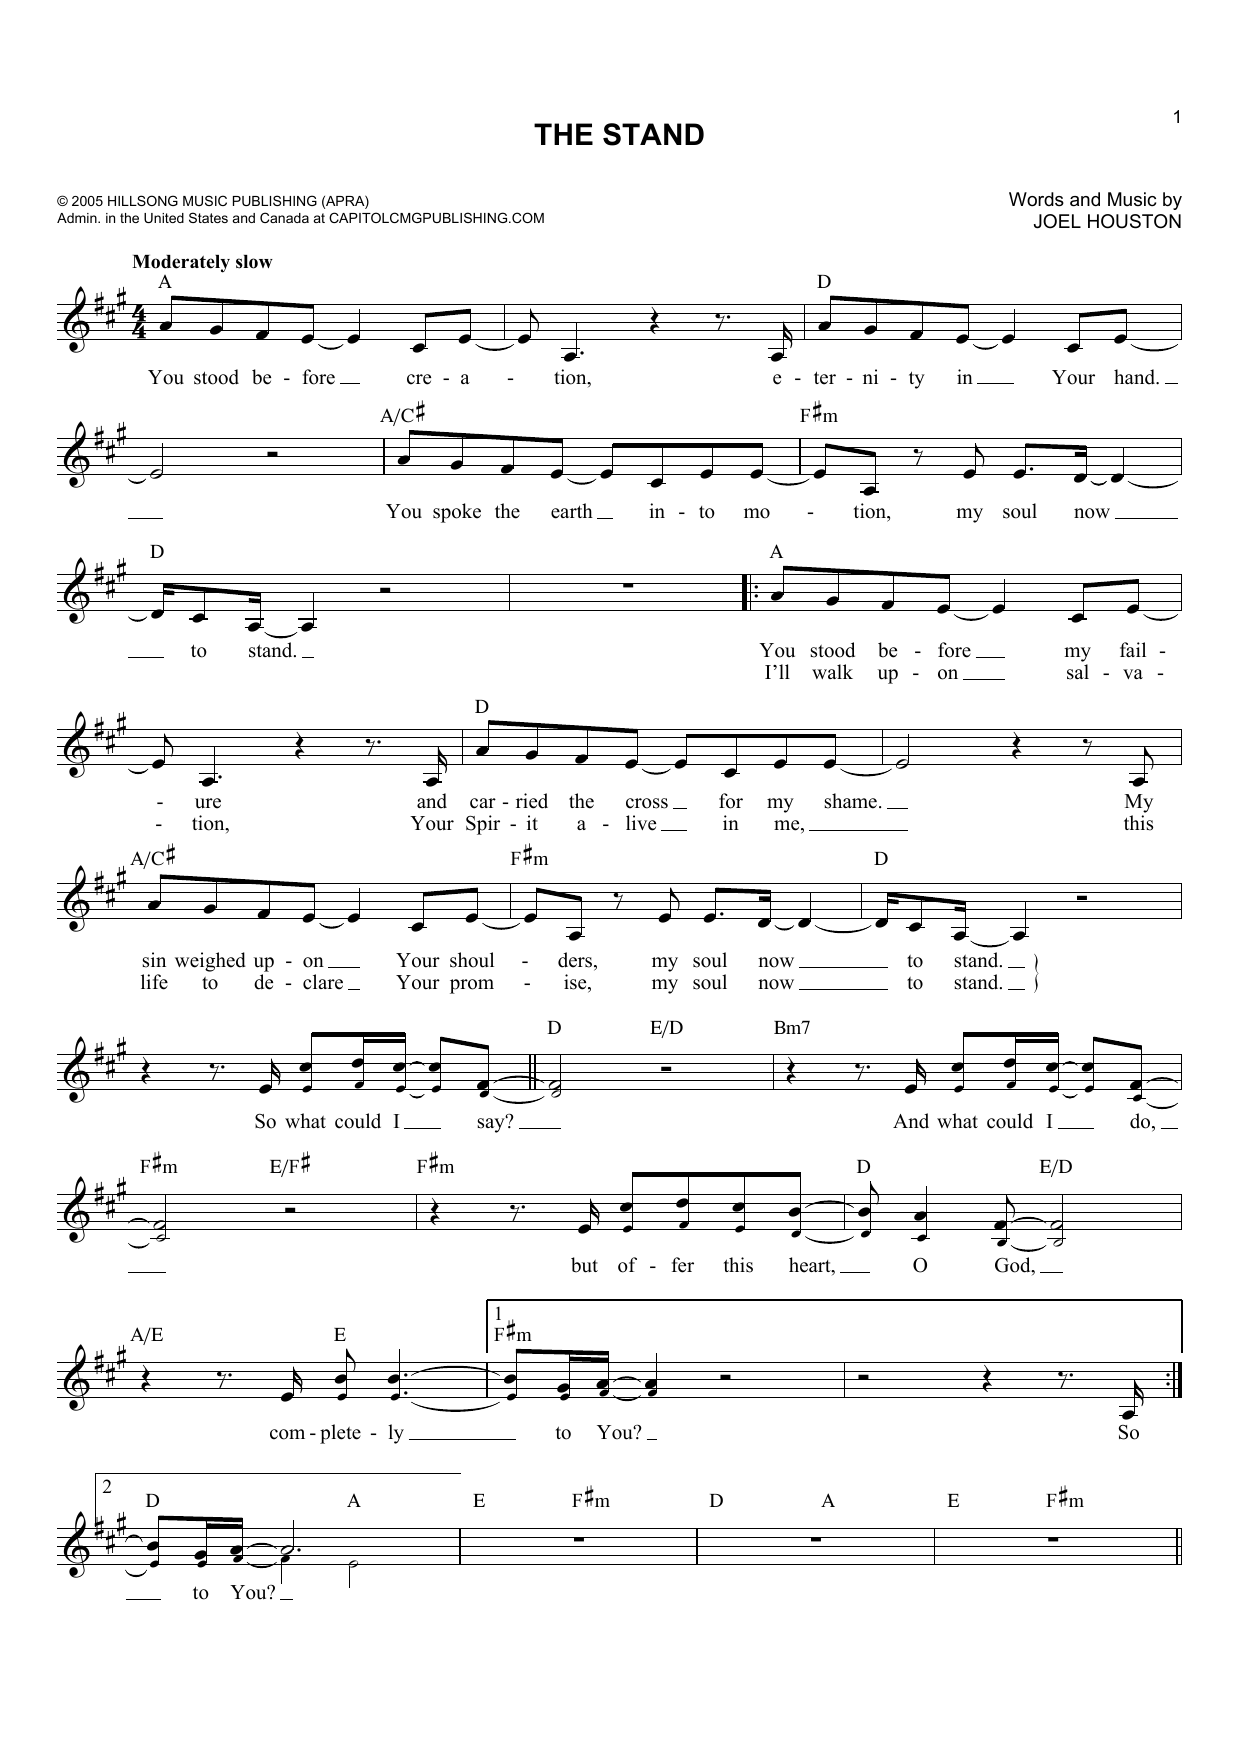 Download Joel Houston The Stand Sheet Music